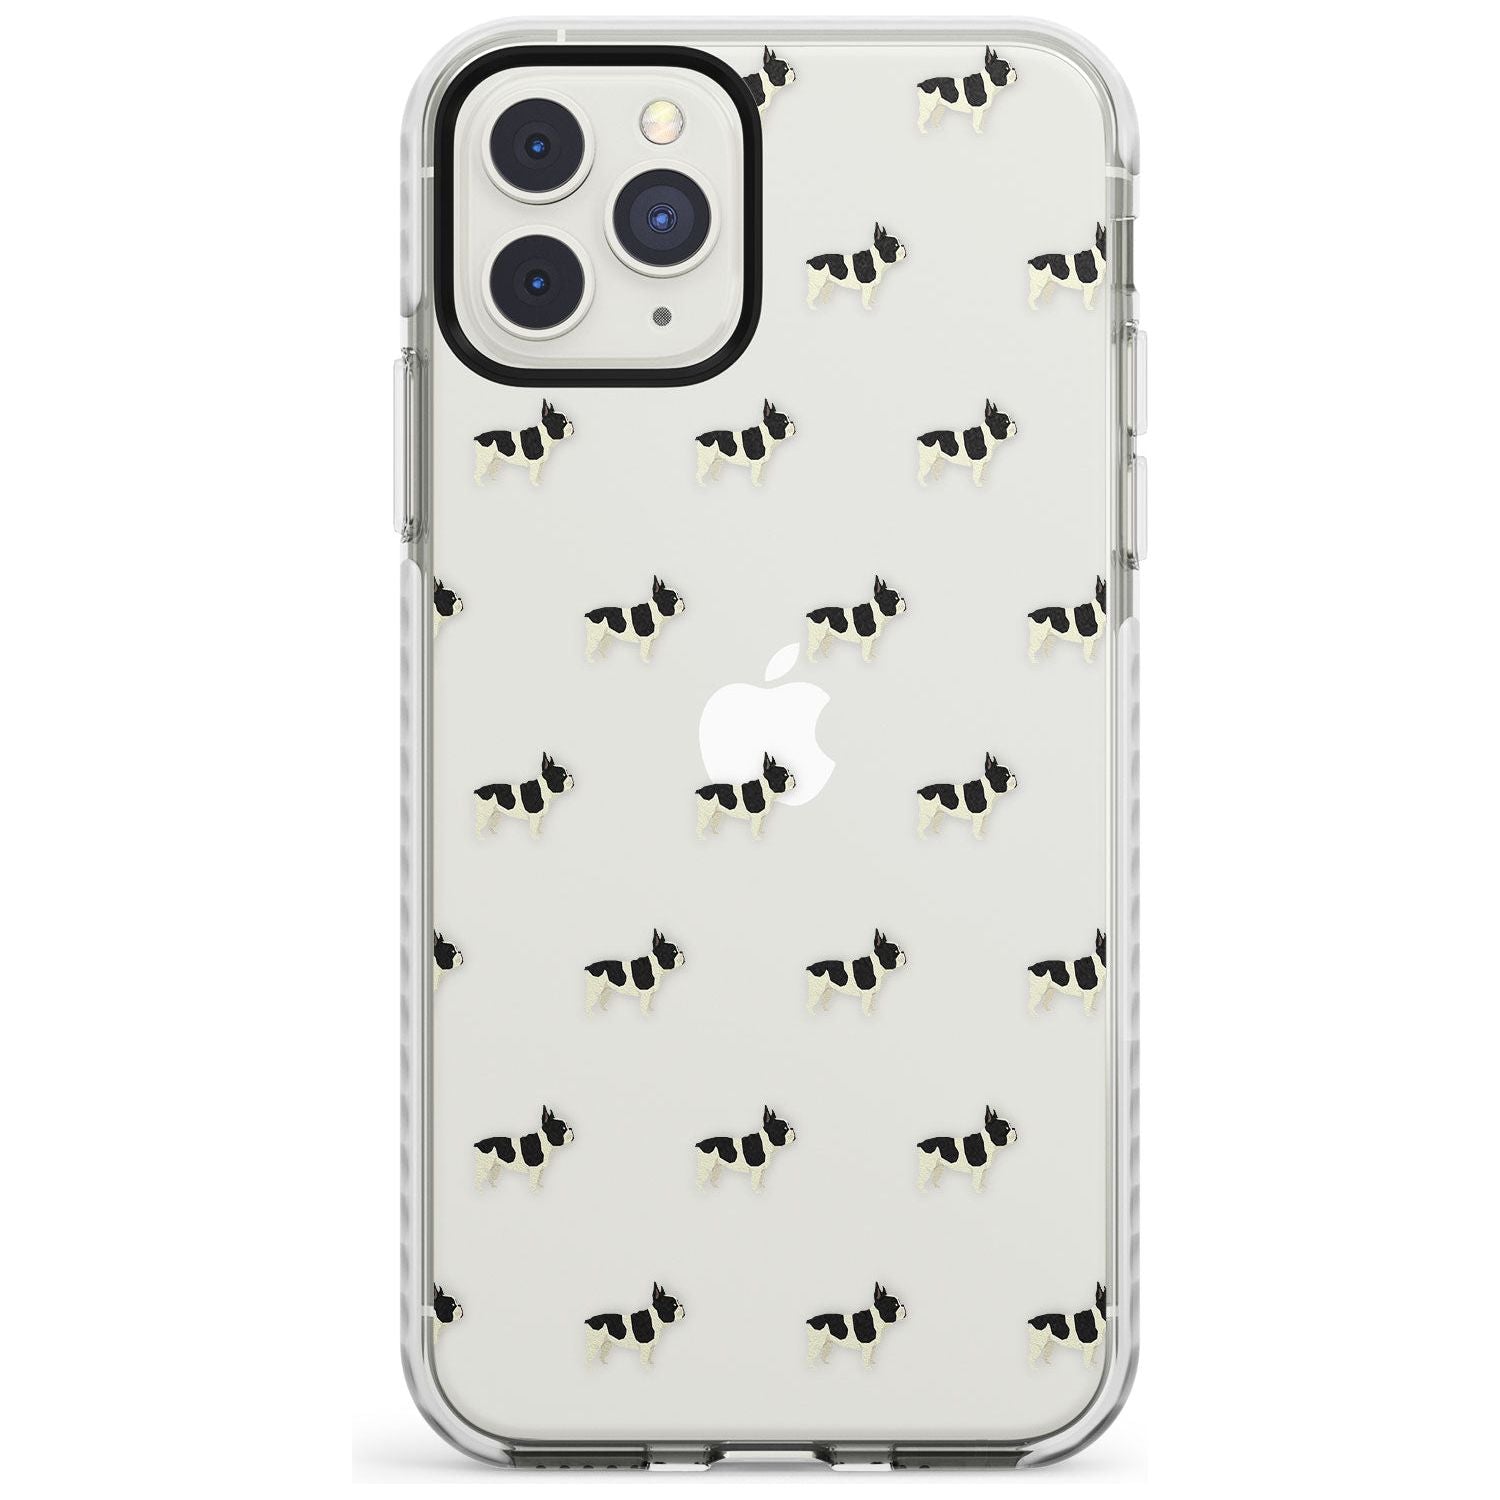 French Bulldog Dog Pattern Clear Impact Phone Case for iPhone 11 Pro Max